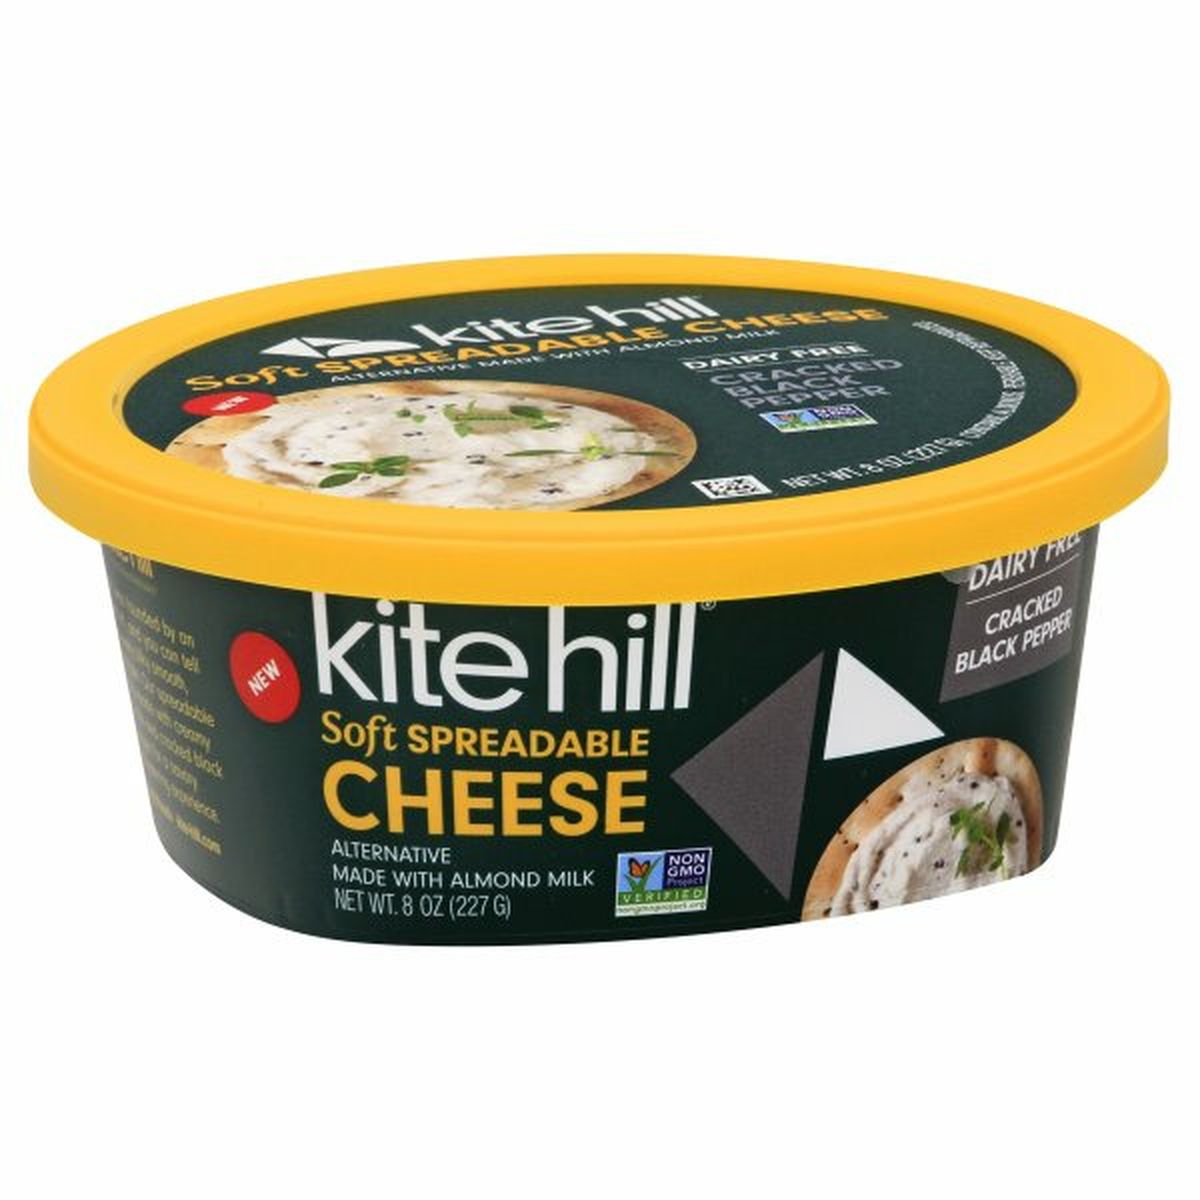 Calories in Kite Hill Cheese, Soft, Spreadable, Cracked Black Pepper, Dairy Free